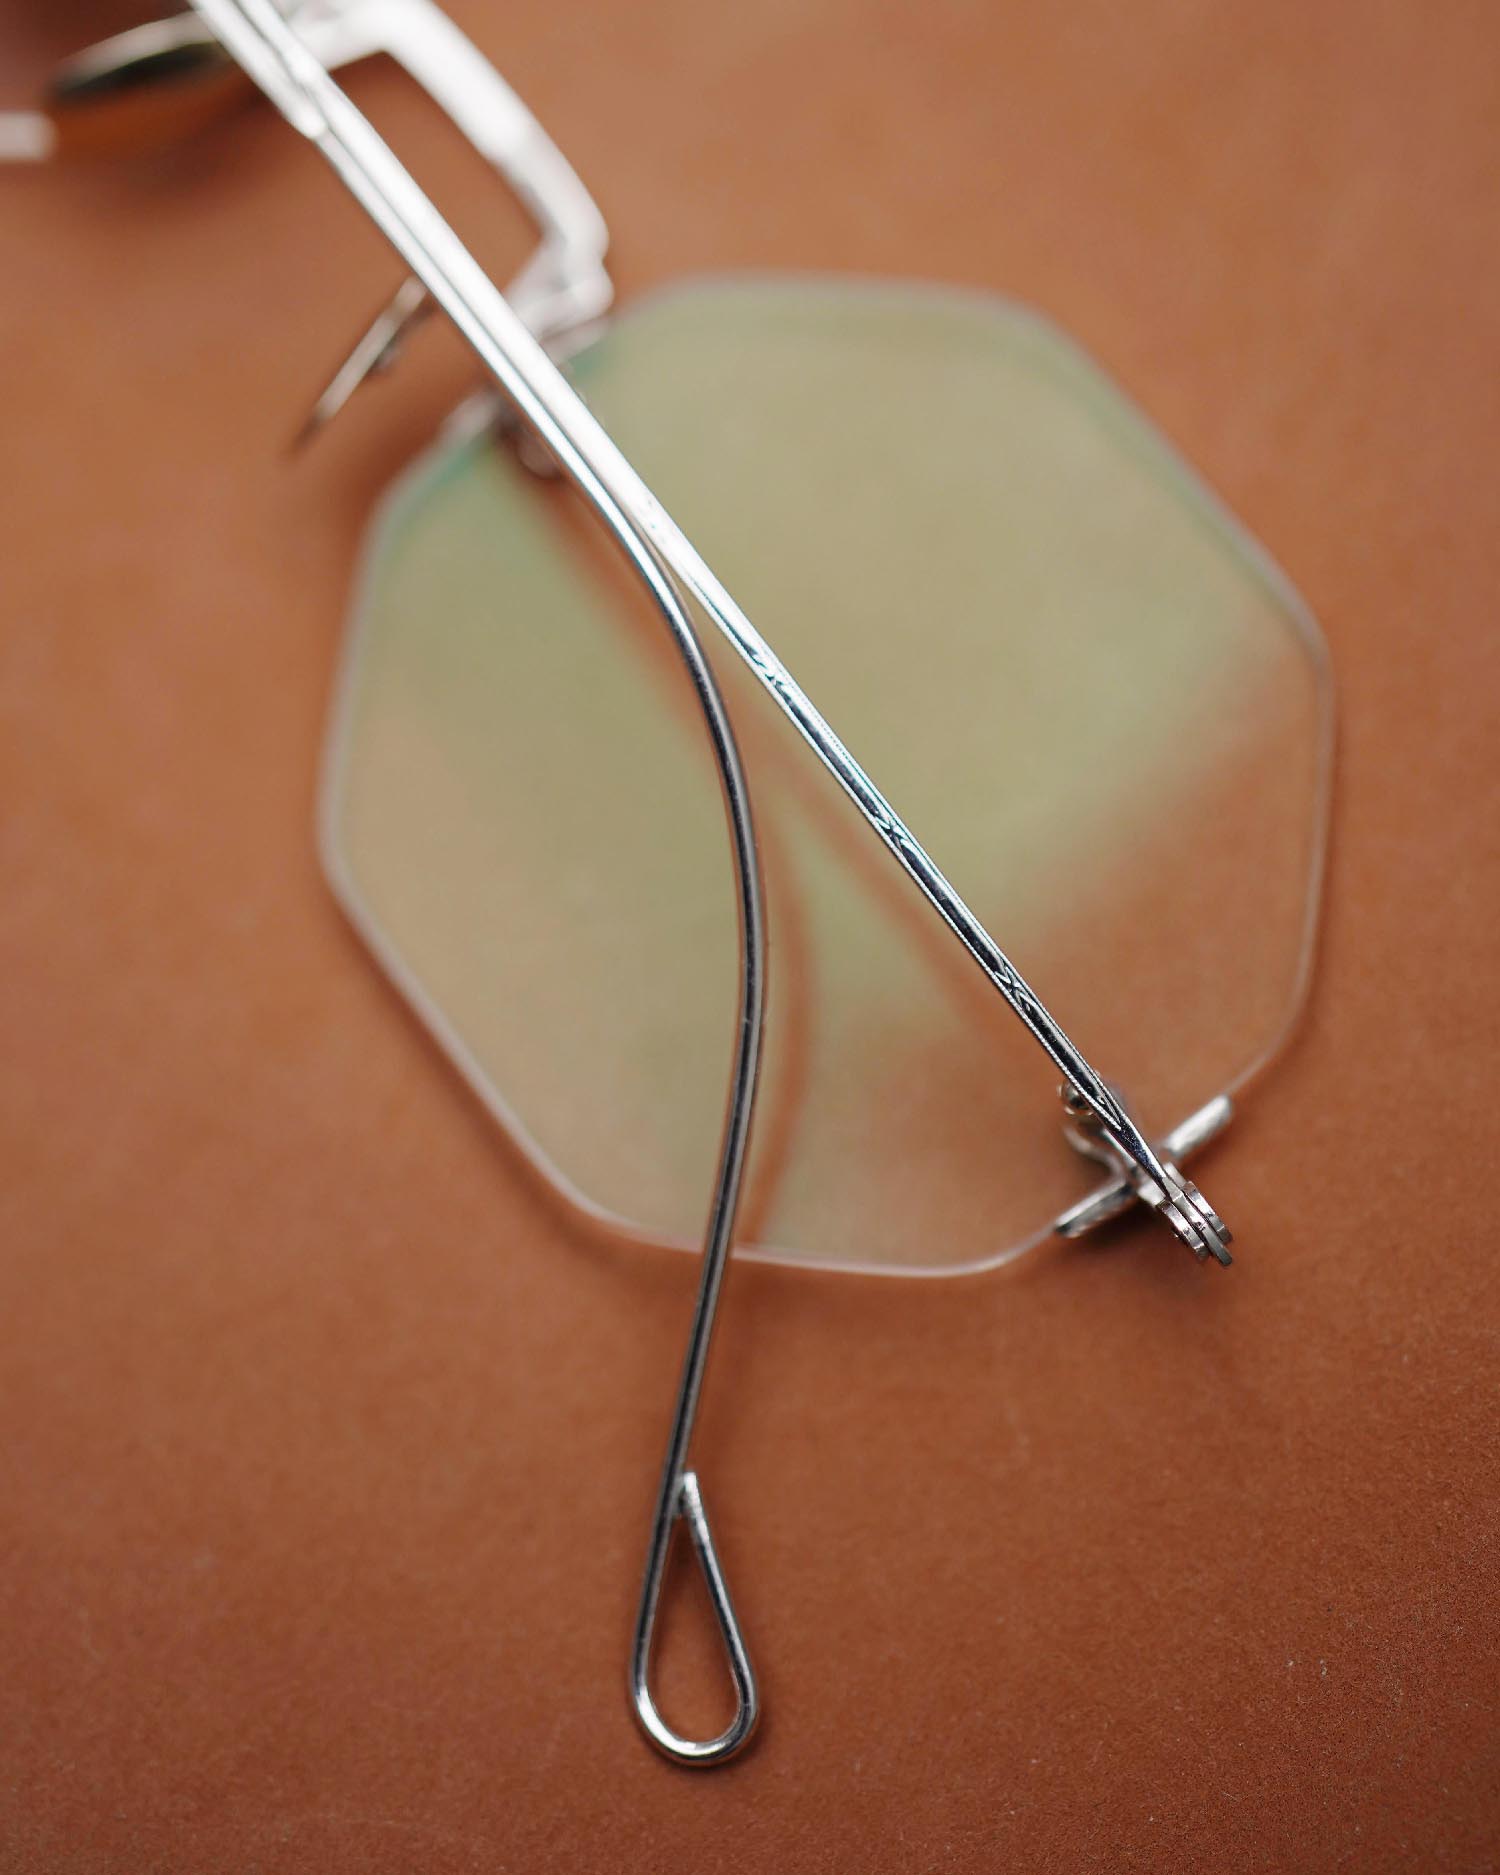 The Spectacle/ American Optical vintage GFメガネ [1930s Octagon 3-Piece Side-Mount WG